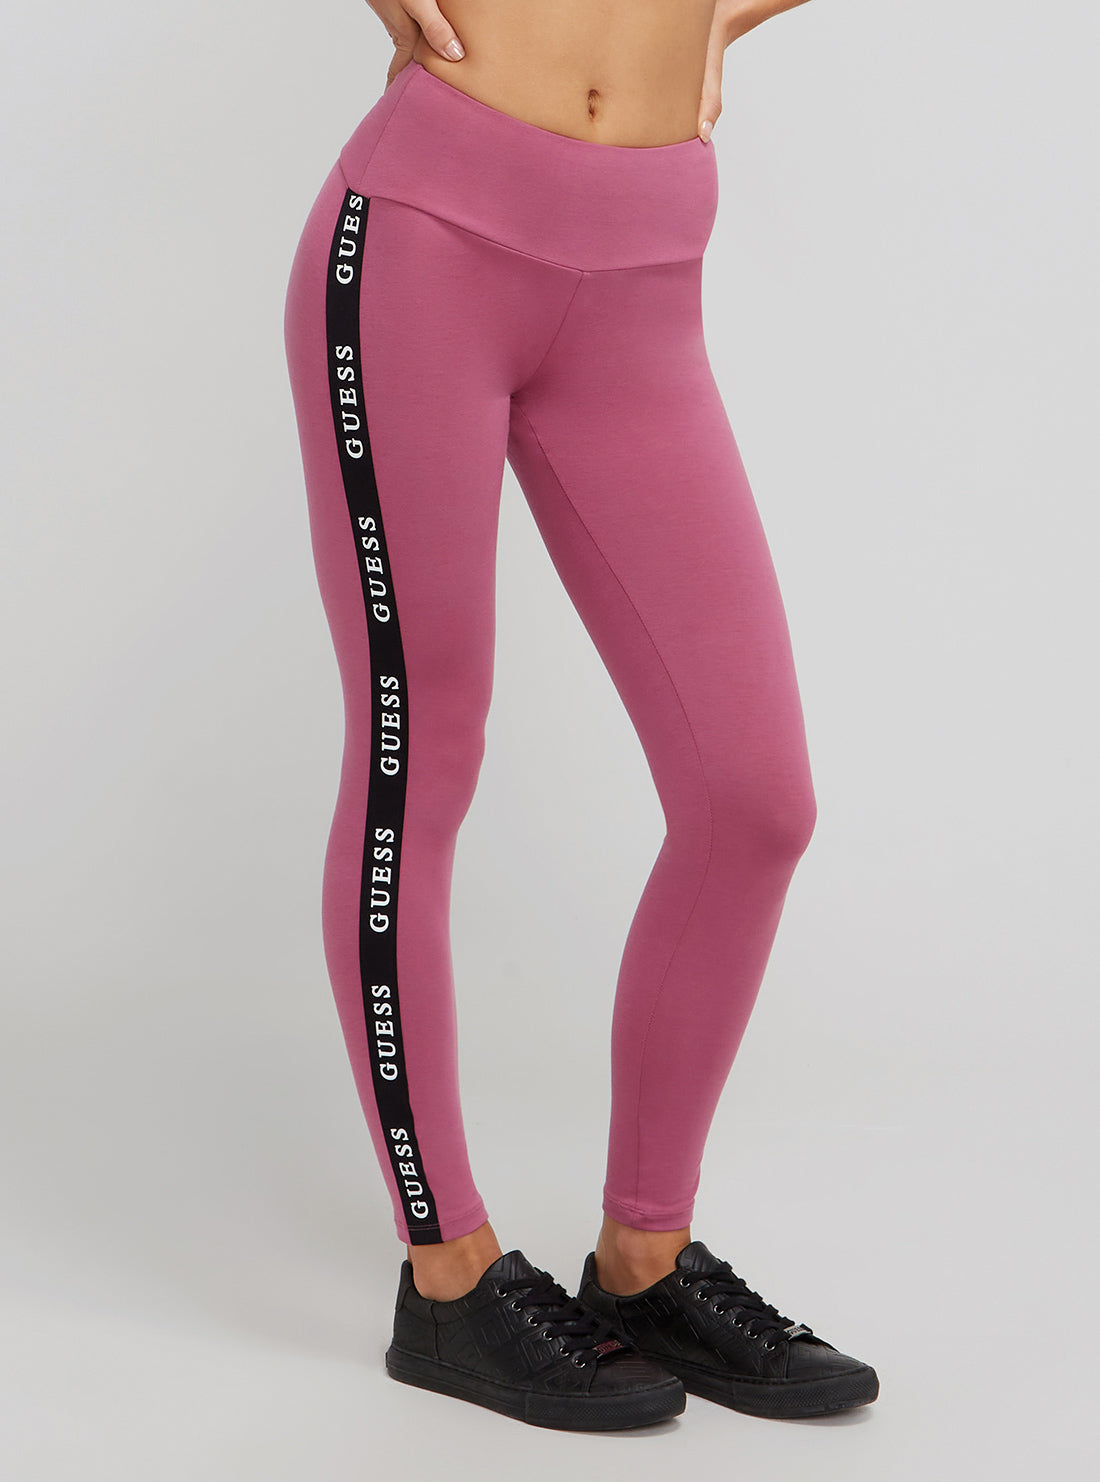 Guess Women's Active Full Length Leggings, Washed Out Pink, Medium :  : Clothing, Shoes & Accessories